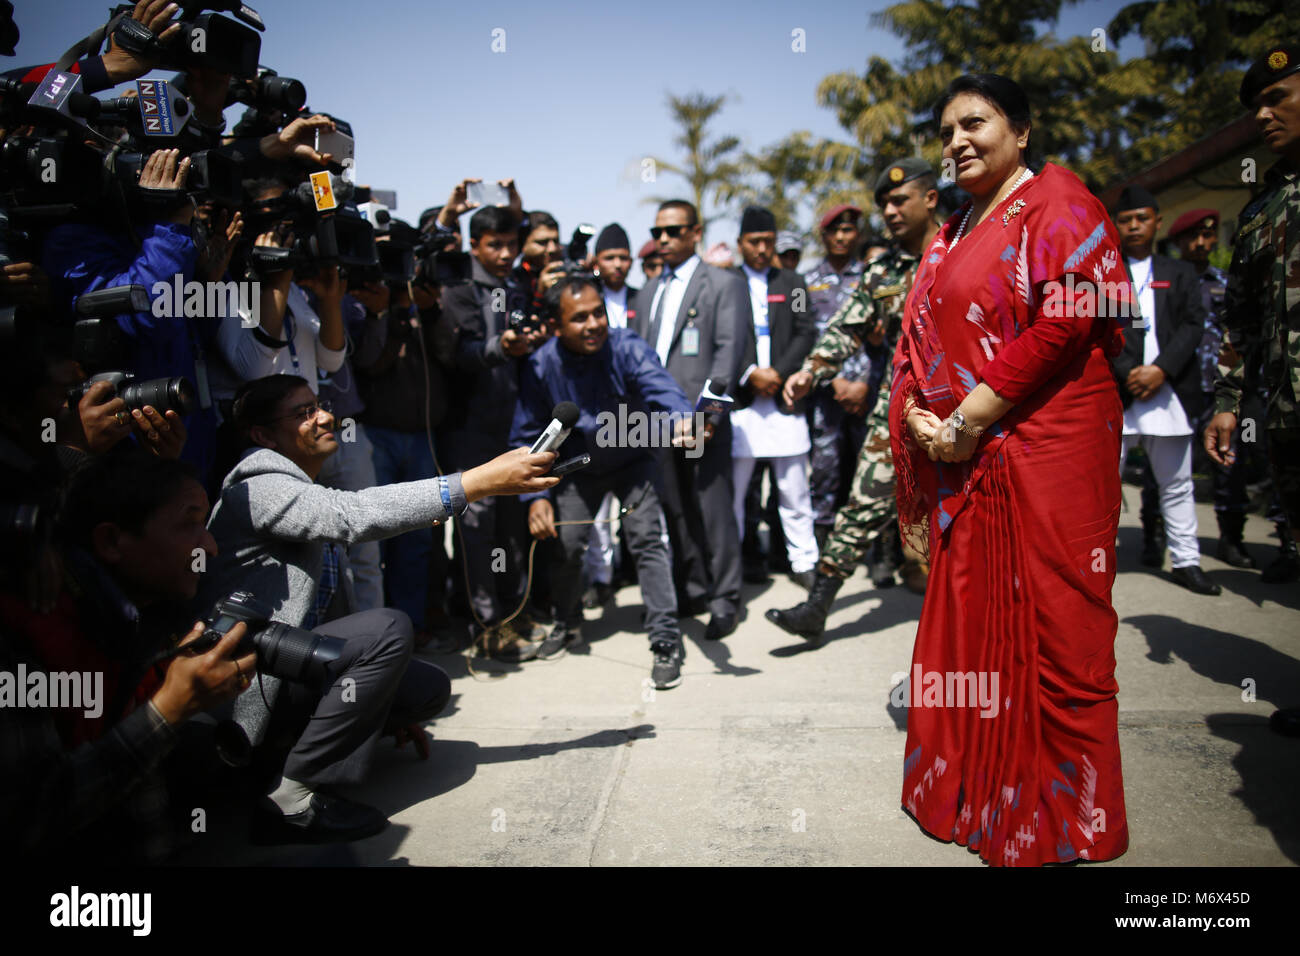 March 7, 2018 - Kathmandu, Nepal - President Bidhya Devi Bhandari speaks to media persons after registering her candidacy for the presidential election at Federal Parliament in Kathmandu, Nepal on Wednesday, March 07, 2018. (Credit Image: © Skanda Gautam via ZUMA Wire) Stock Photo